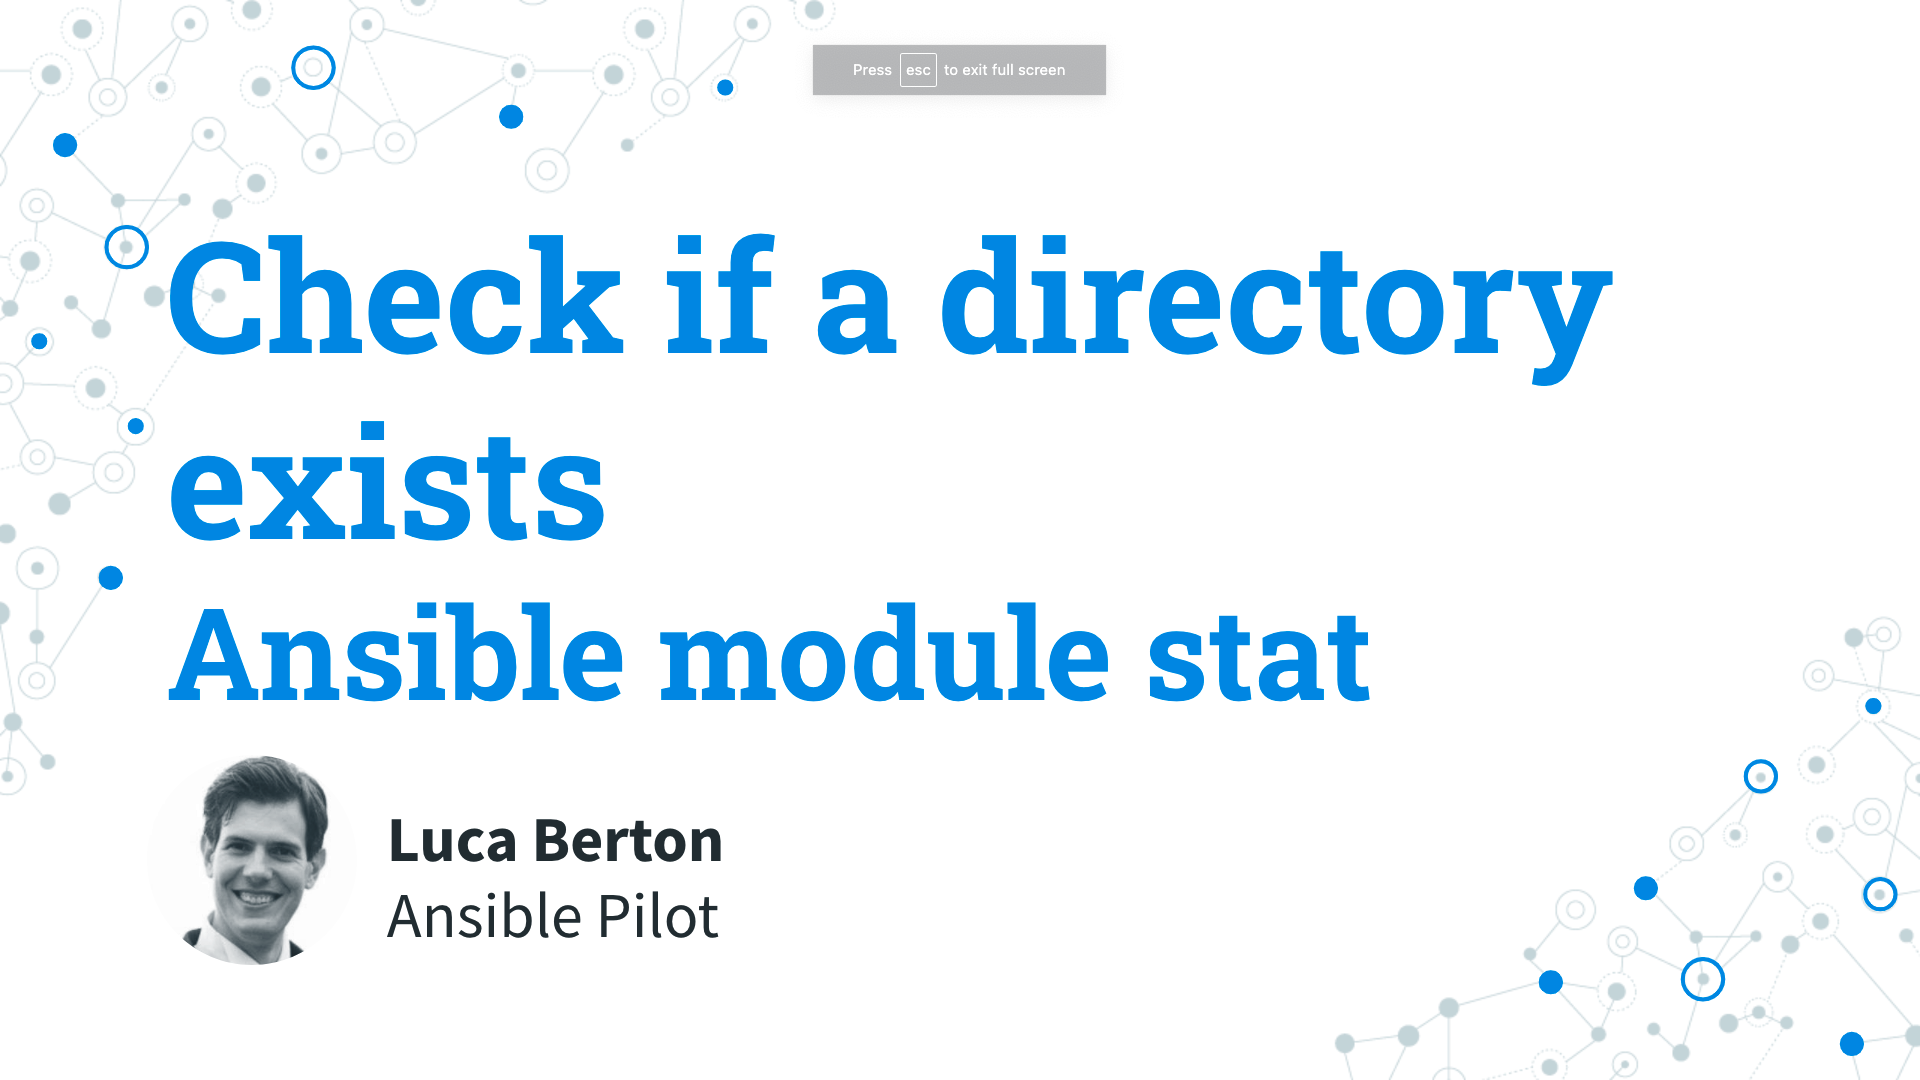 Check if a directory exists - Ansible module stat